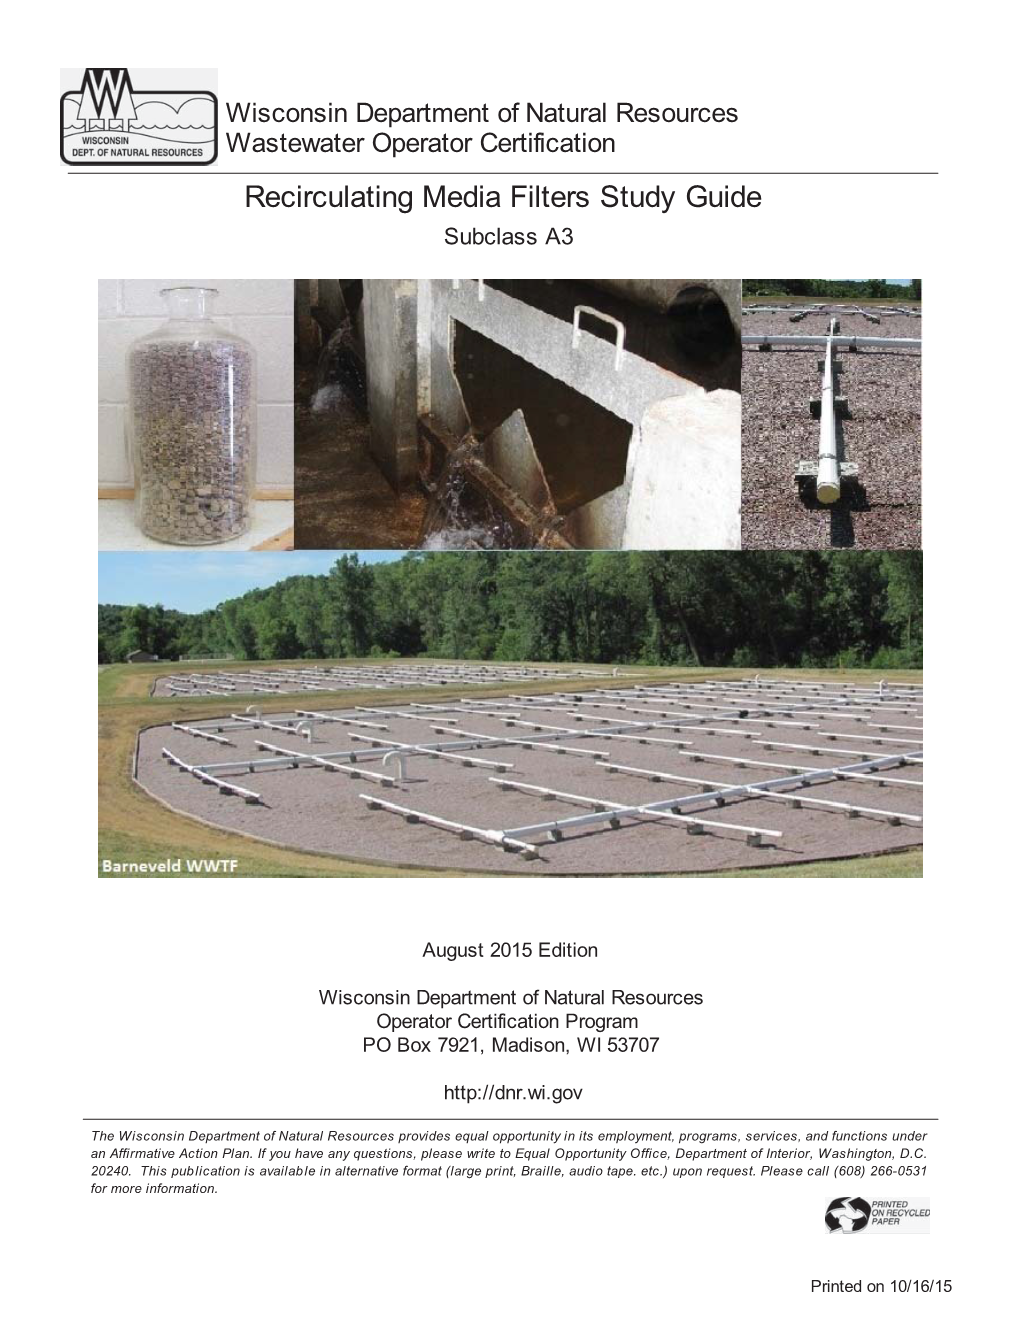 Recirculating Media Filters Study Guide Subclass A3